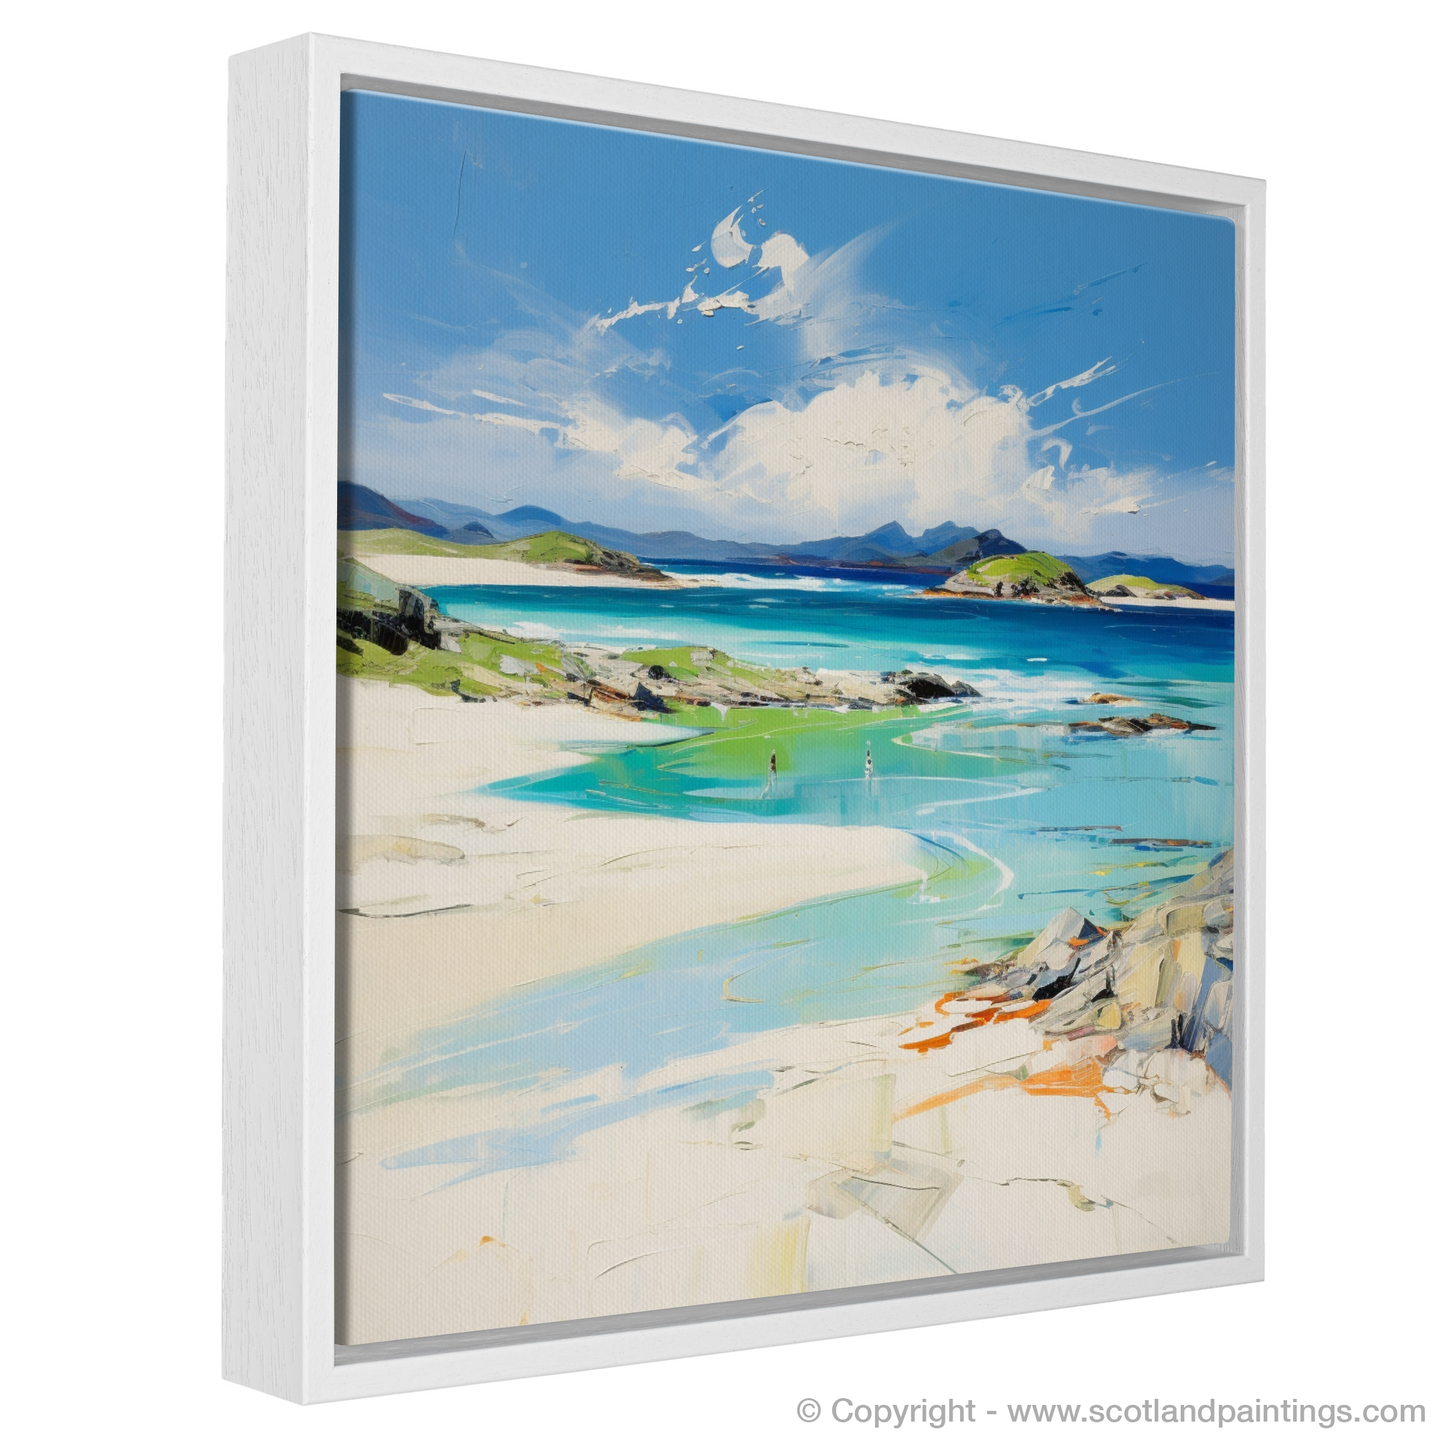 Painting and Art Print of Camusdarach Beach, Arisaig entitled "Abstract Expressions of Camusdarach Beach".